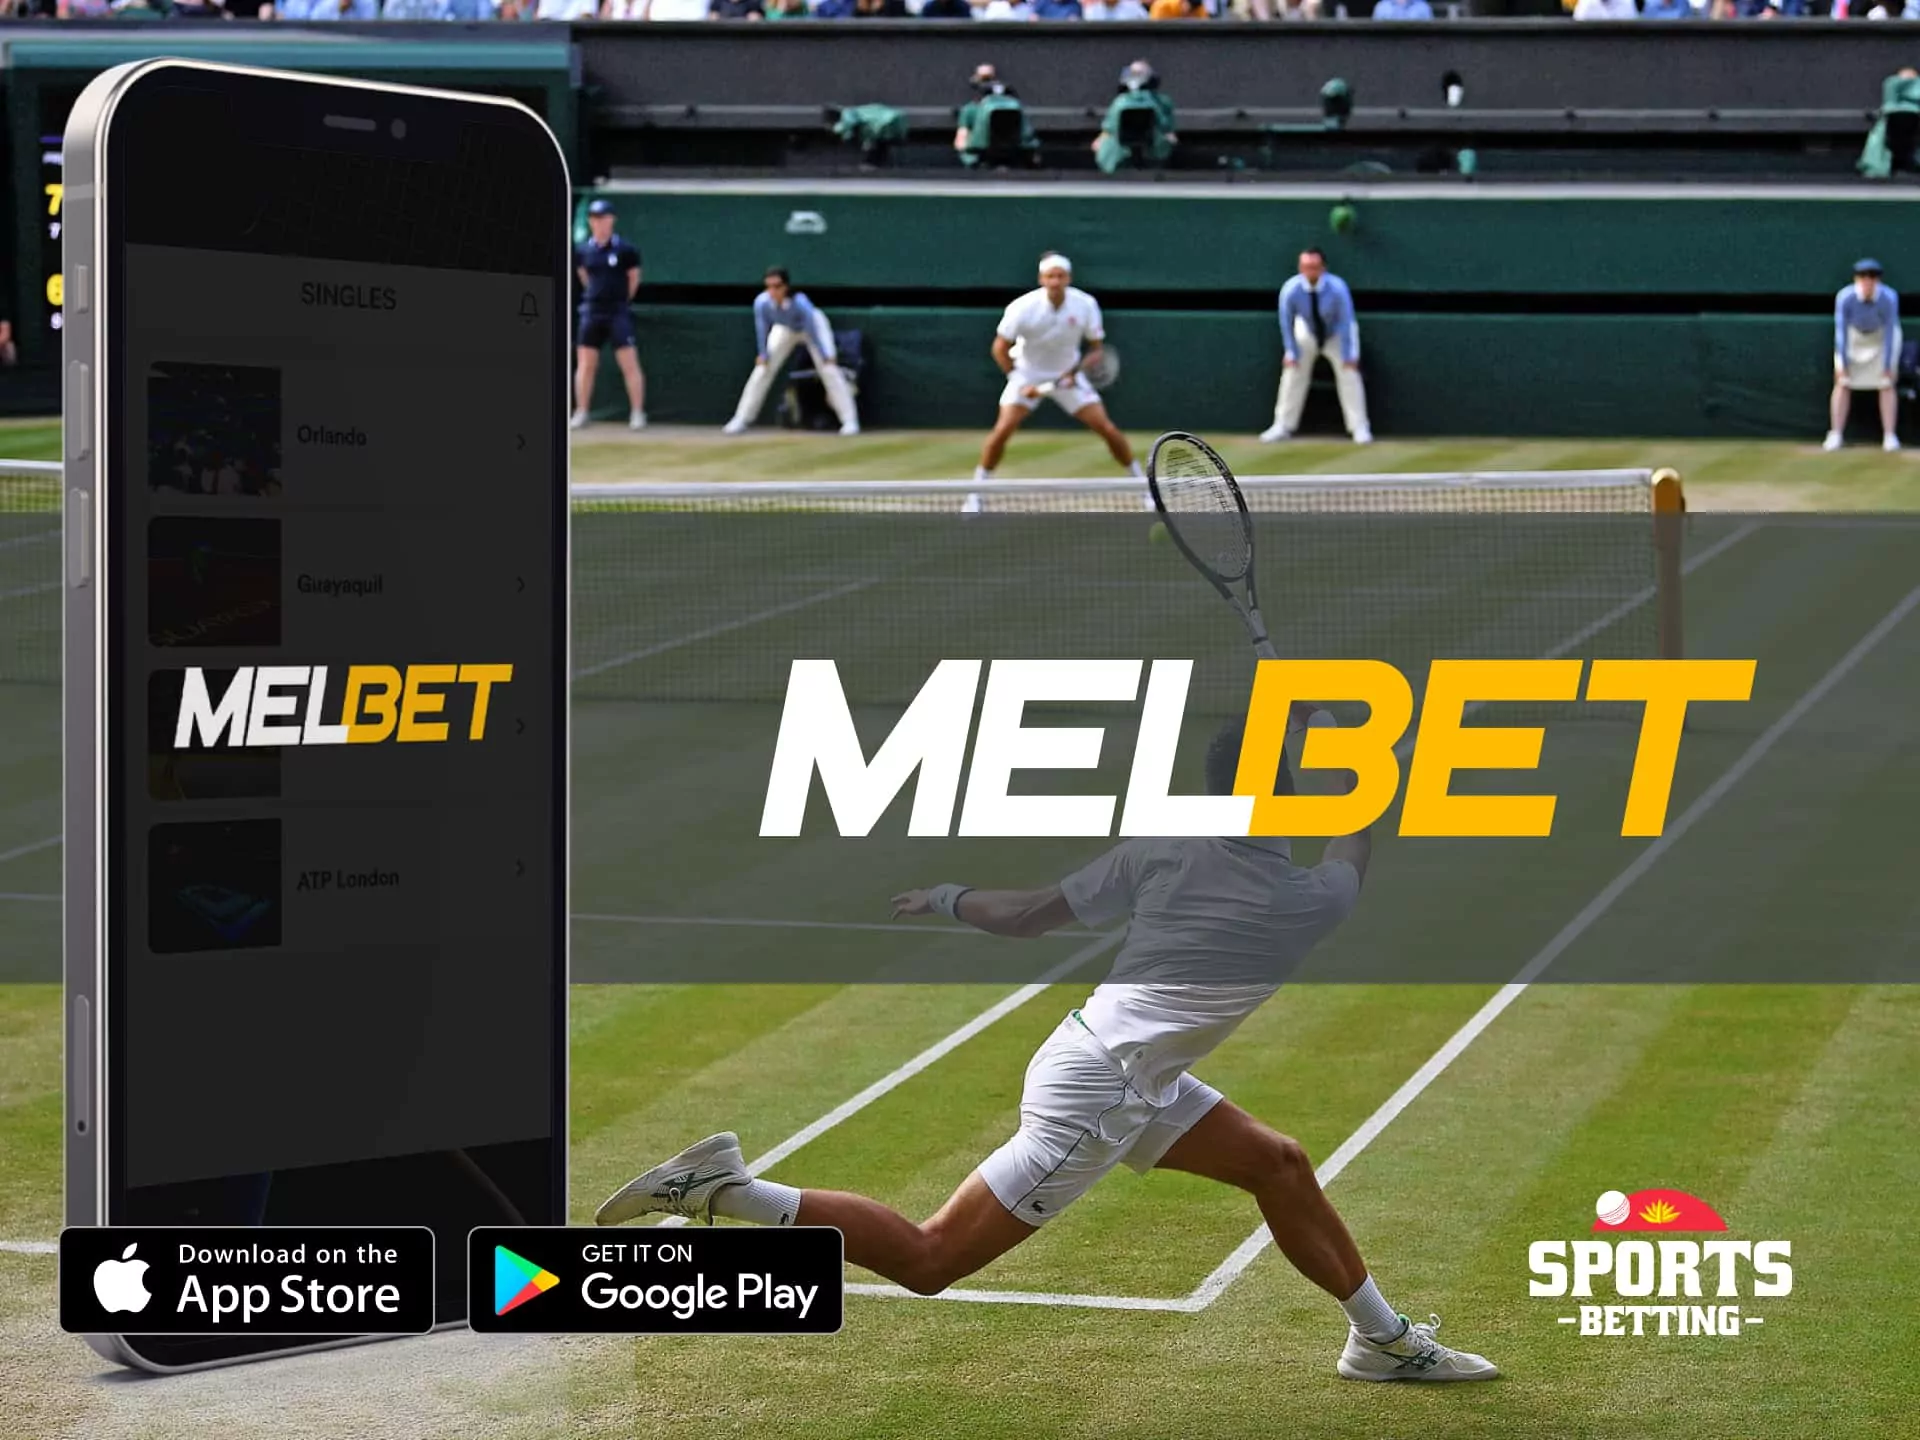 Melbet tennis betting site with fast transaction times.